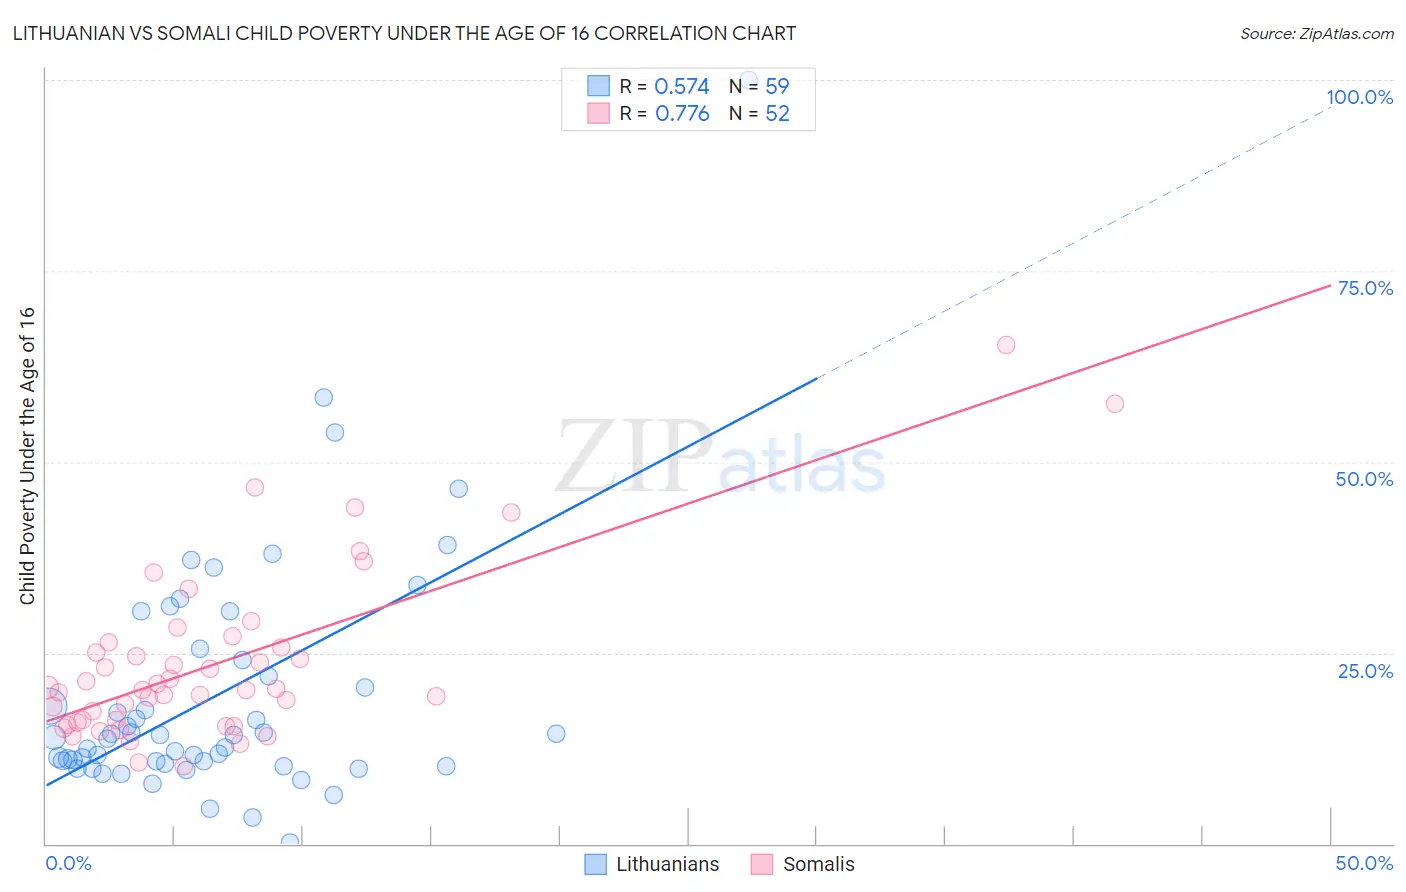 Lithuanian vs Somali Child Poverty Under the Age of 16